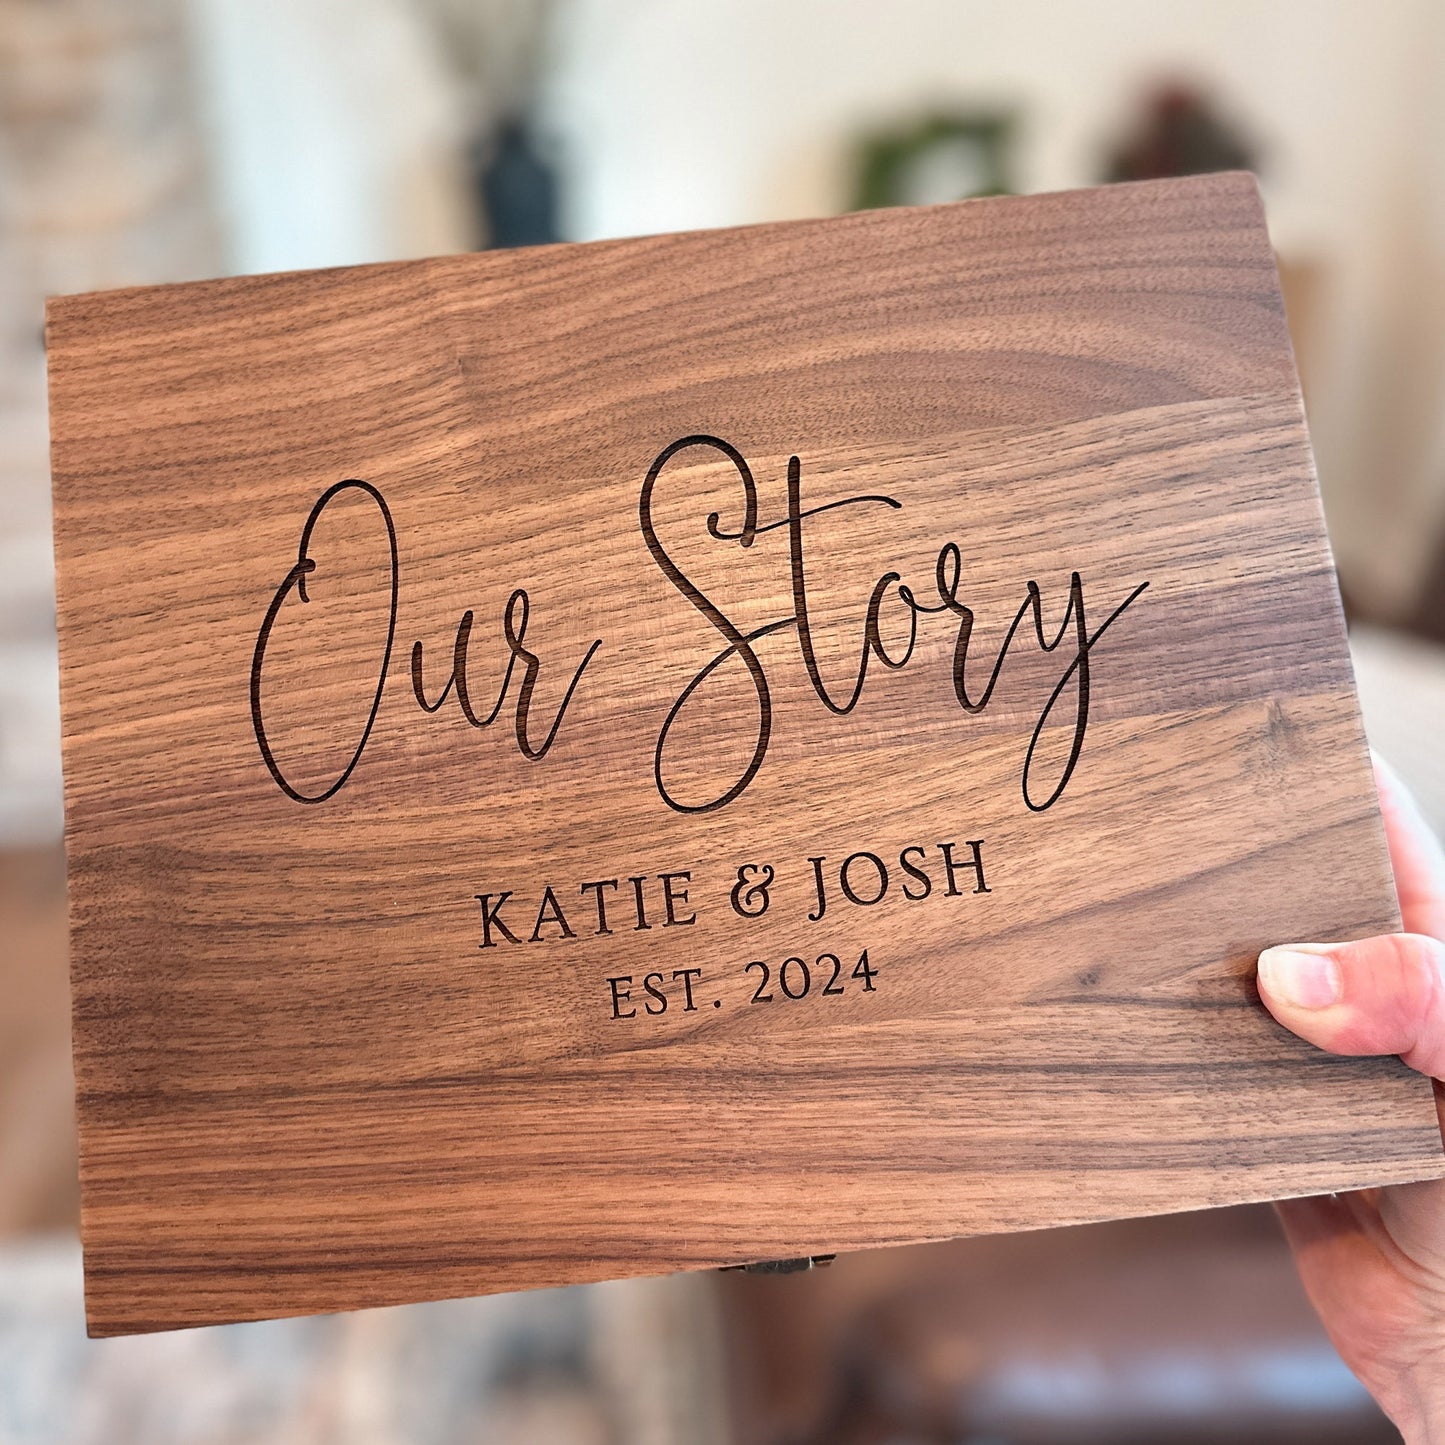 Our Story Personalized Keepsake Box